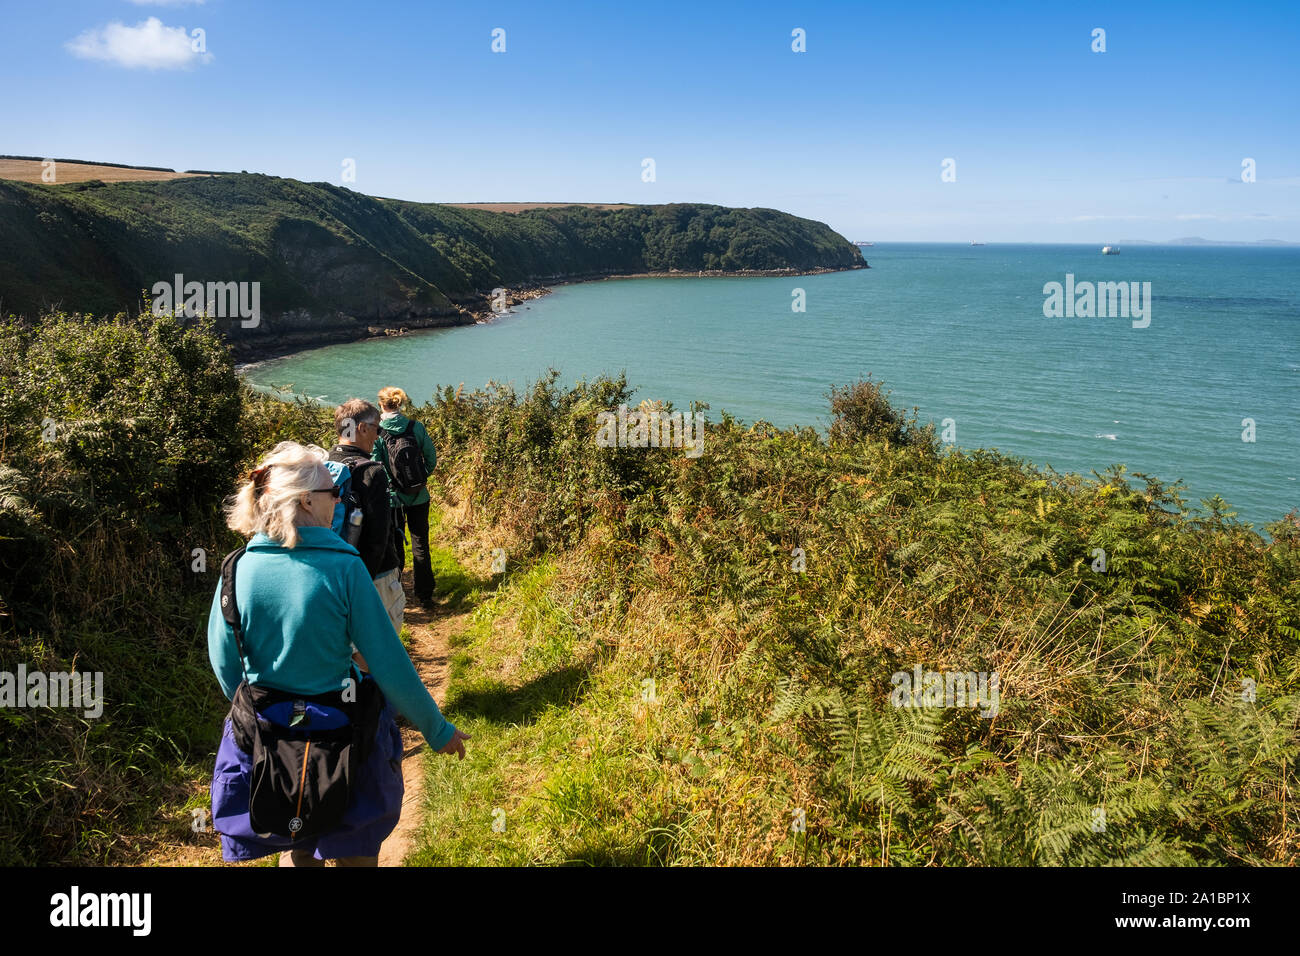 People walking on the Pembrokeshire Coastal Path near Little Haven, on the coast of St Bride's Bay, Pembrokeshire National Park, South West Wales UK Stock Photo